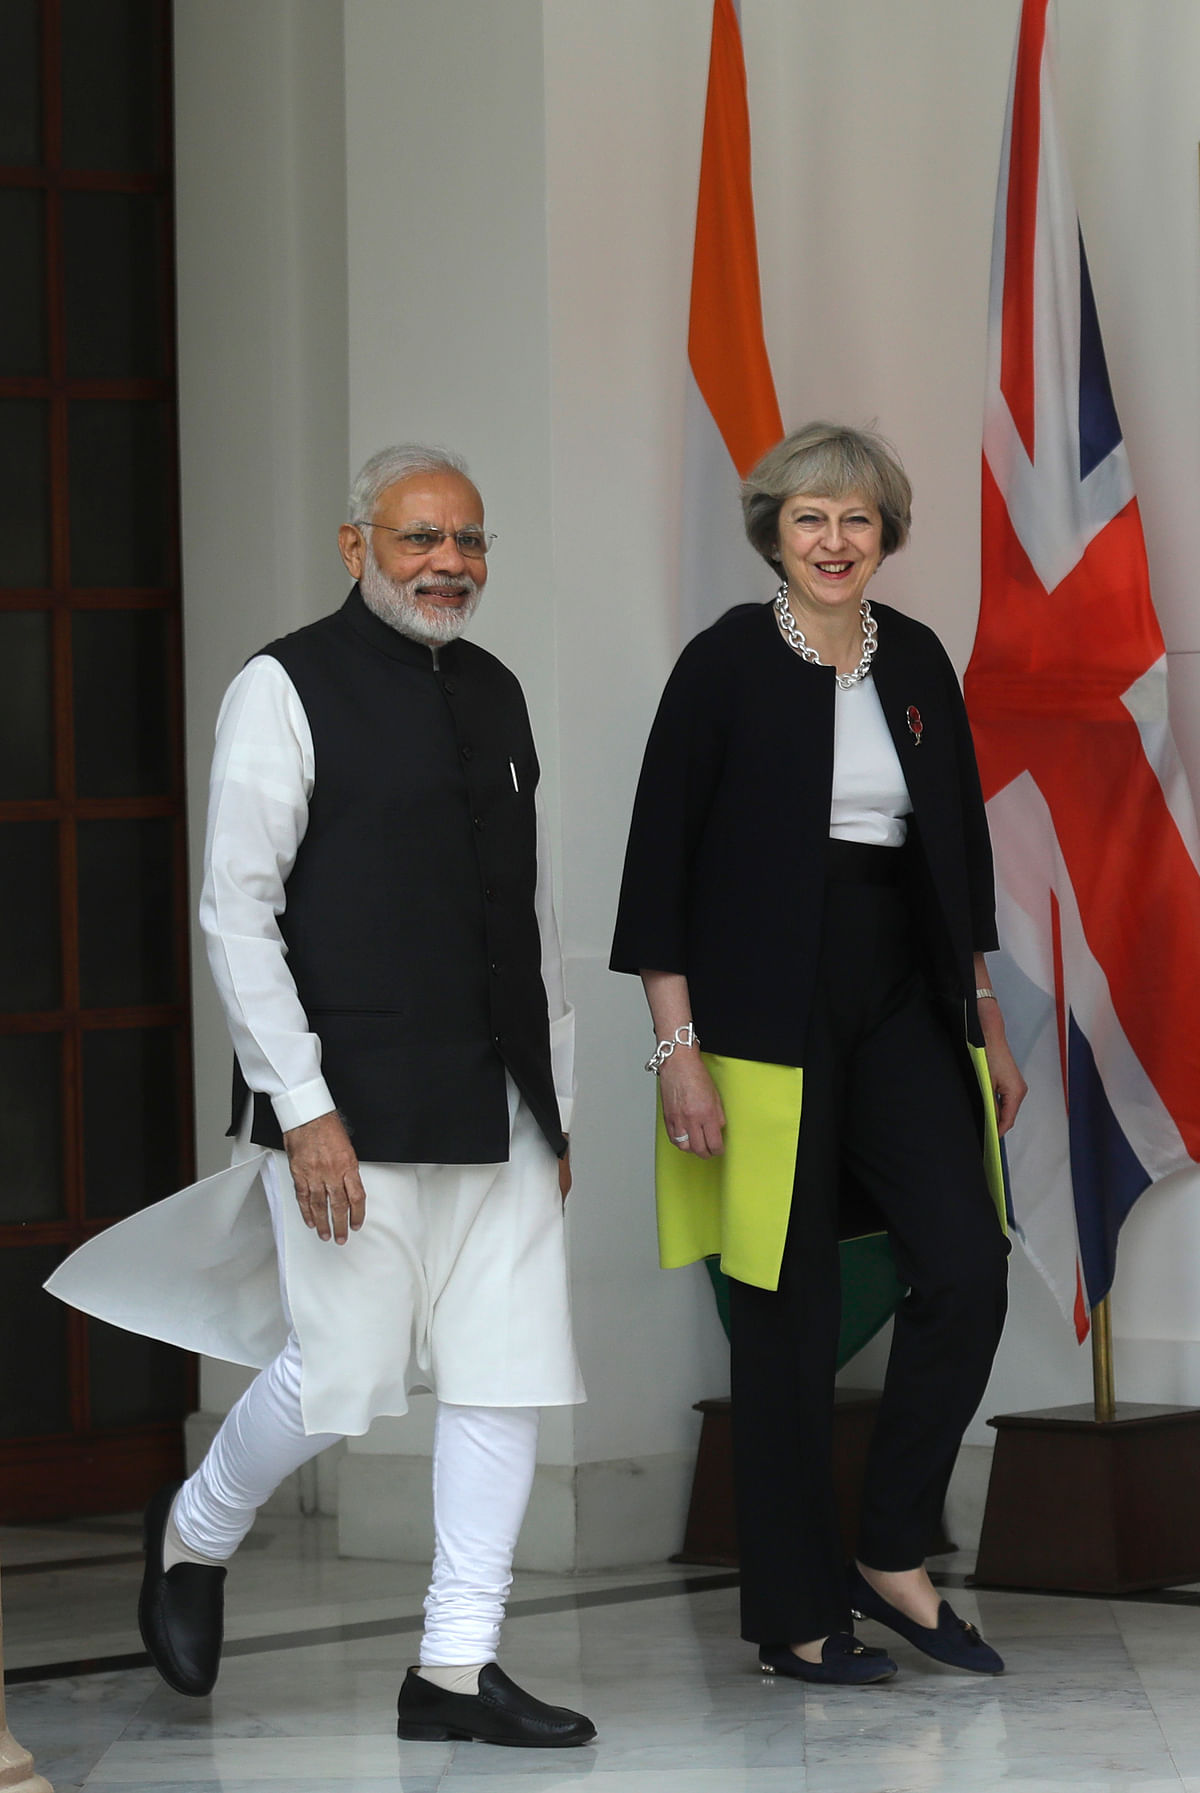 May is all set to hold talks with Narendra Modi to bolster bilateral strategic ties in areas like defence.